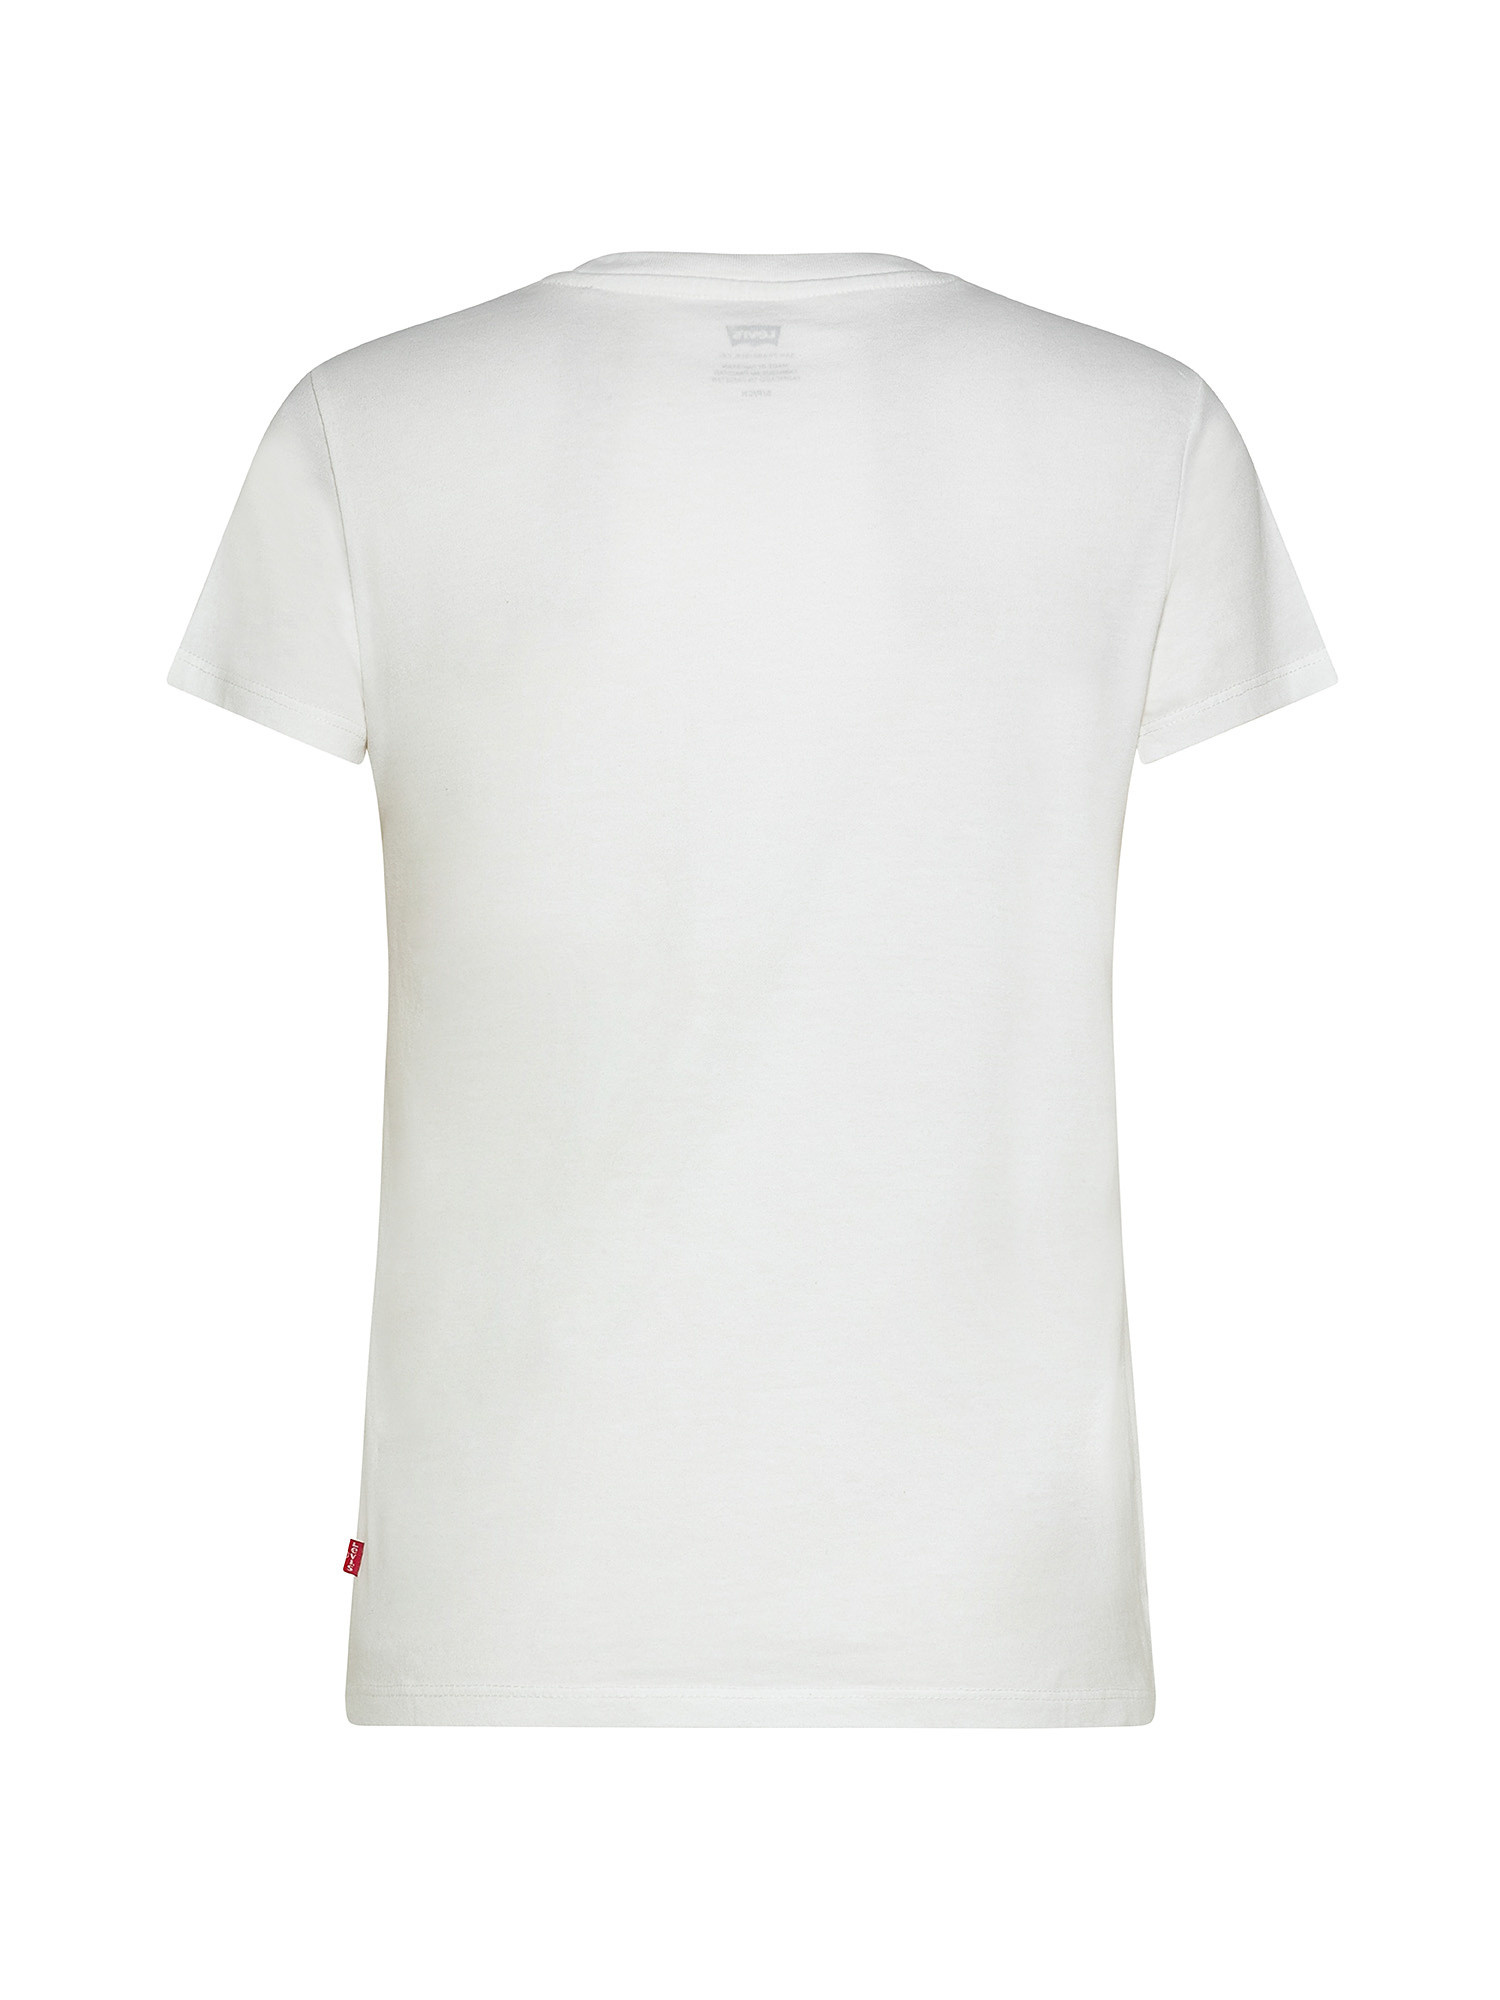 Perfect Tee, White, large image number 1